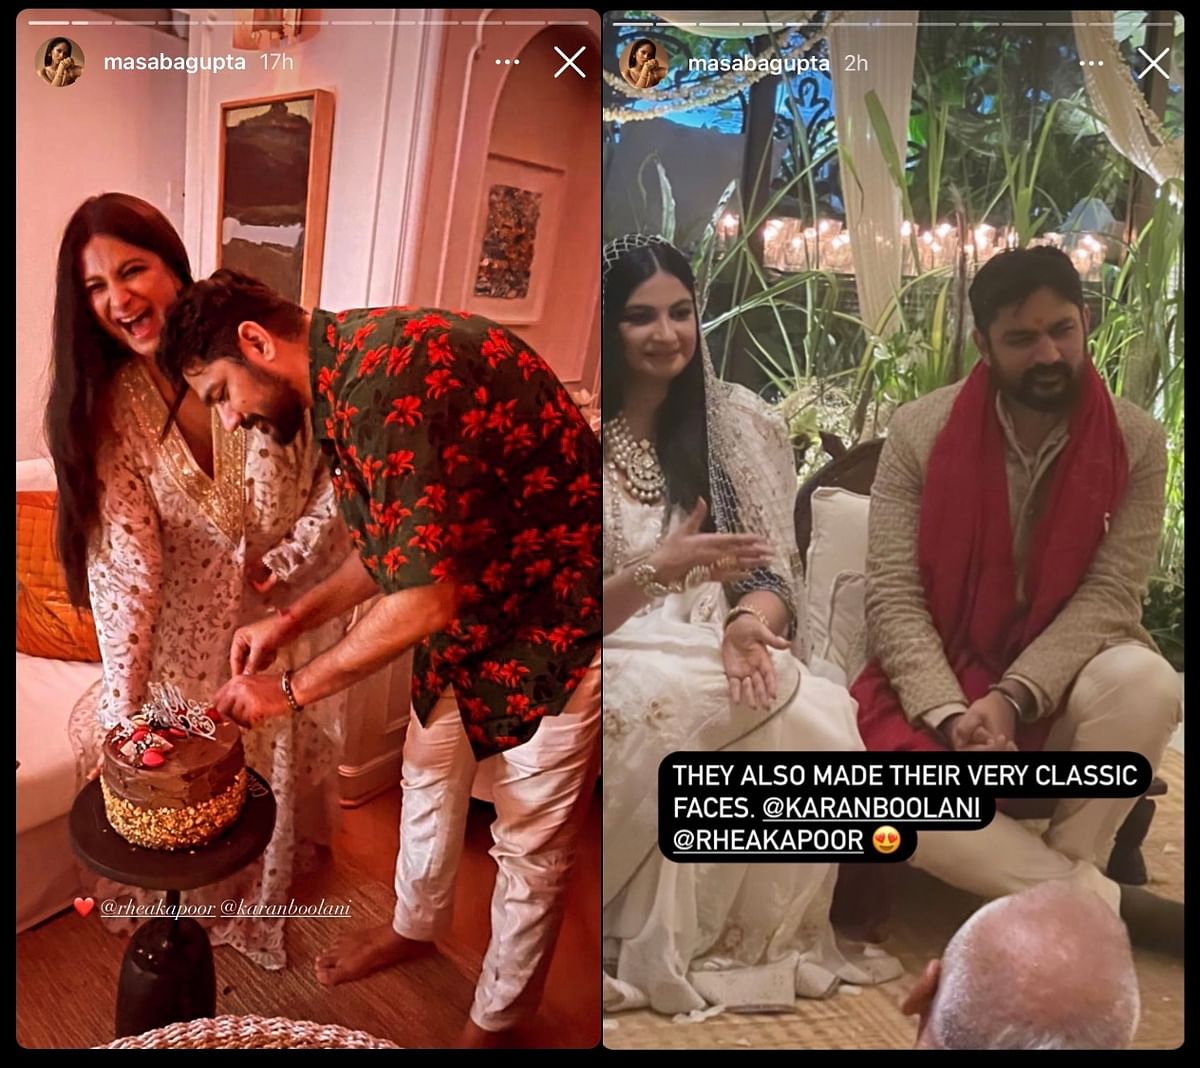 Rhea Kapoor & Karan Boolani tied the knot on 14 August in the presence of close friends and family. 